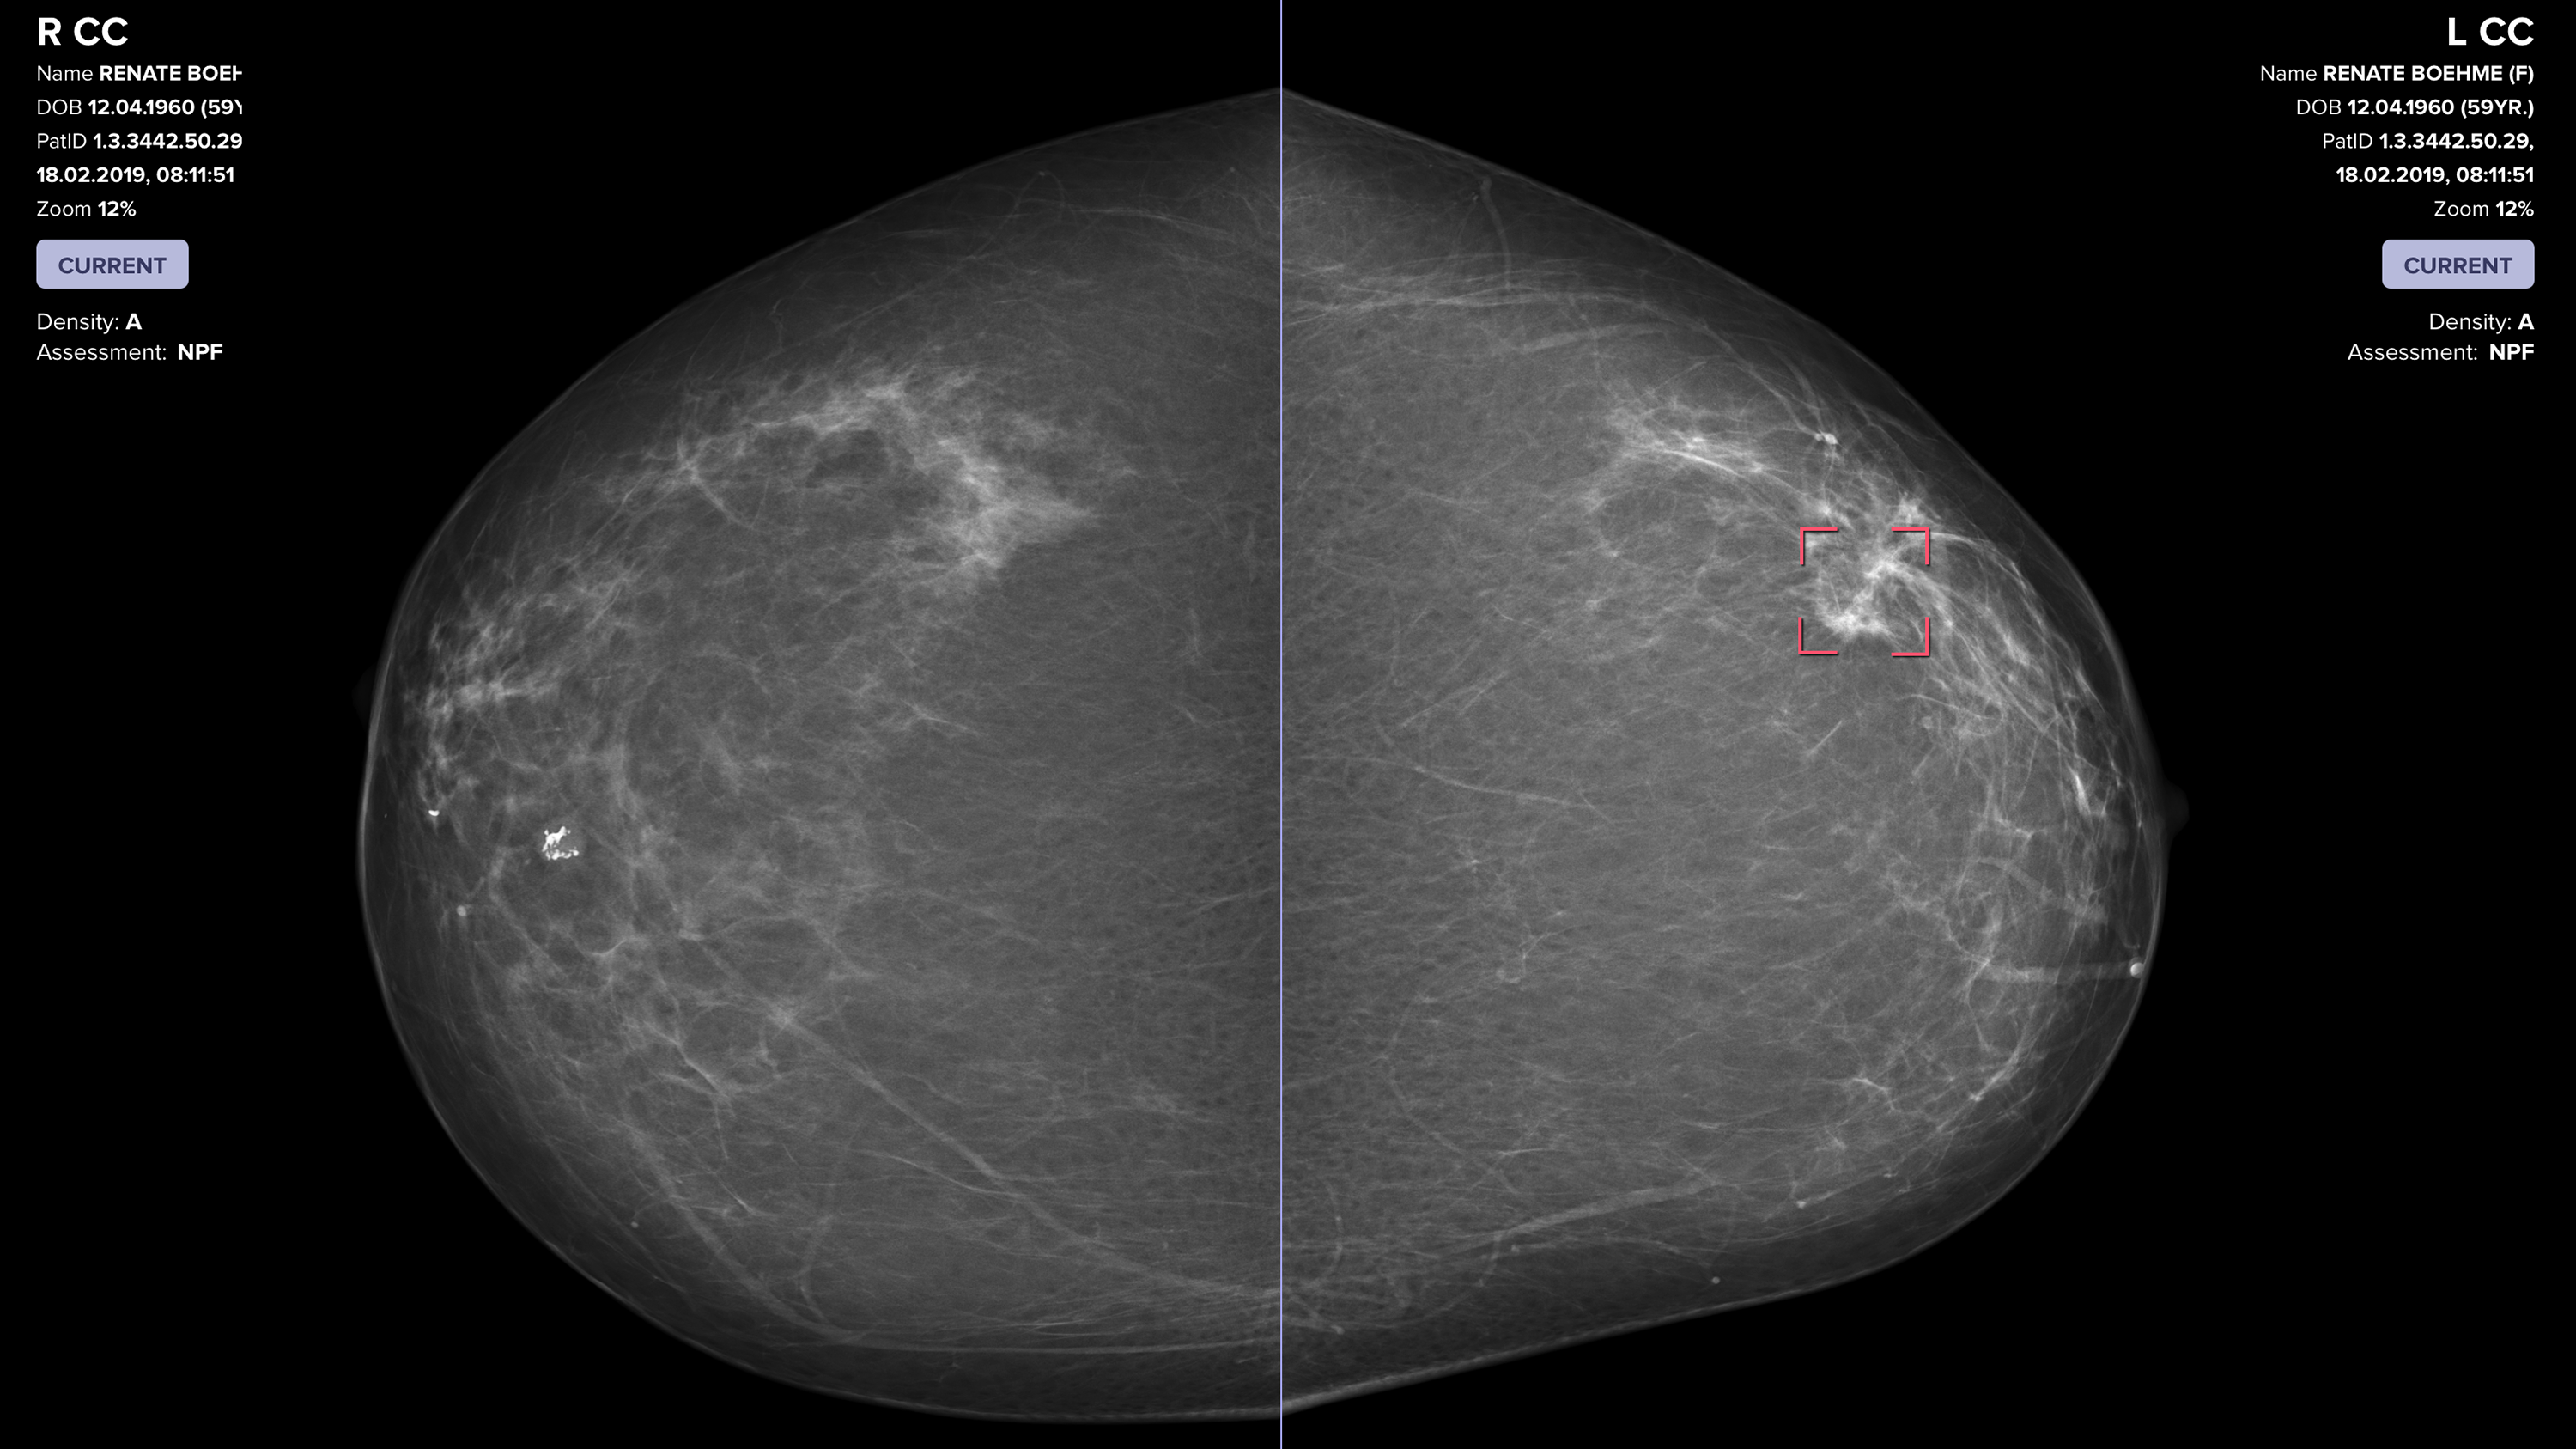 3D mammography detects 34 percent more breast cancers 